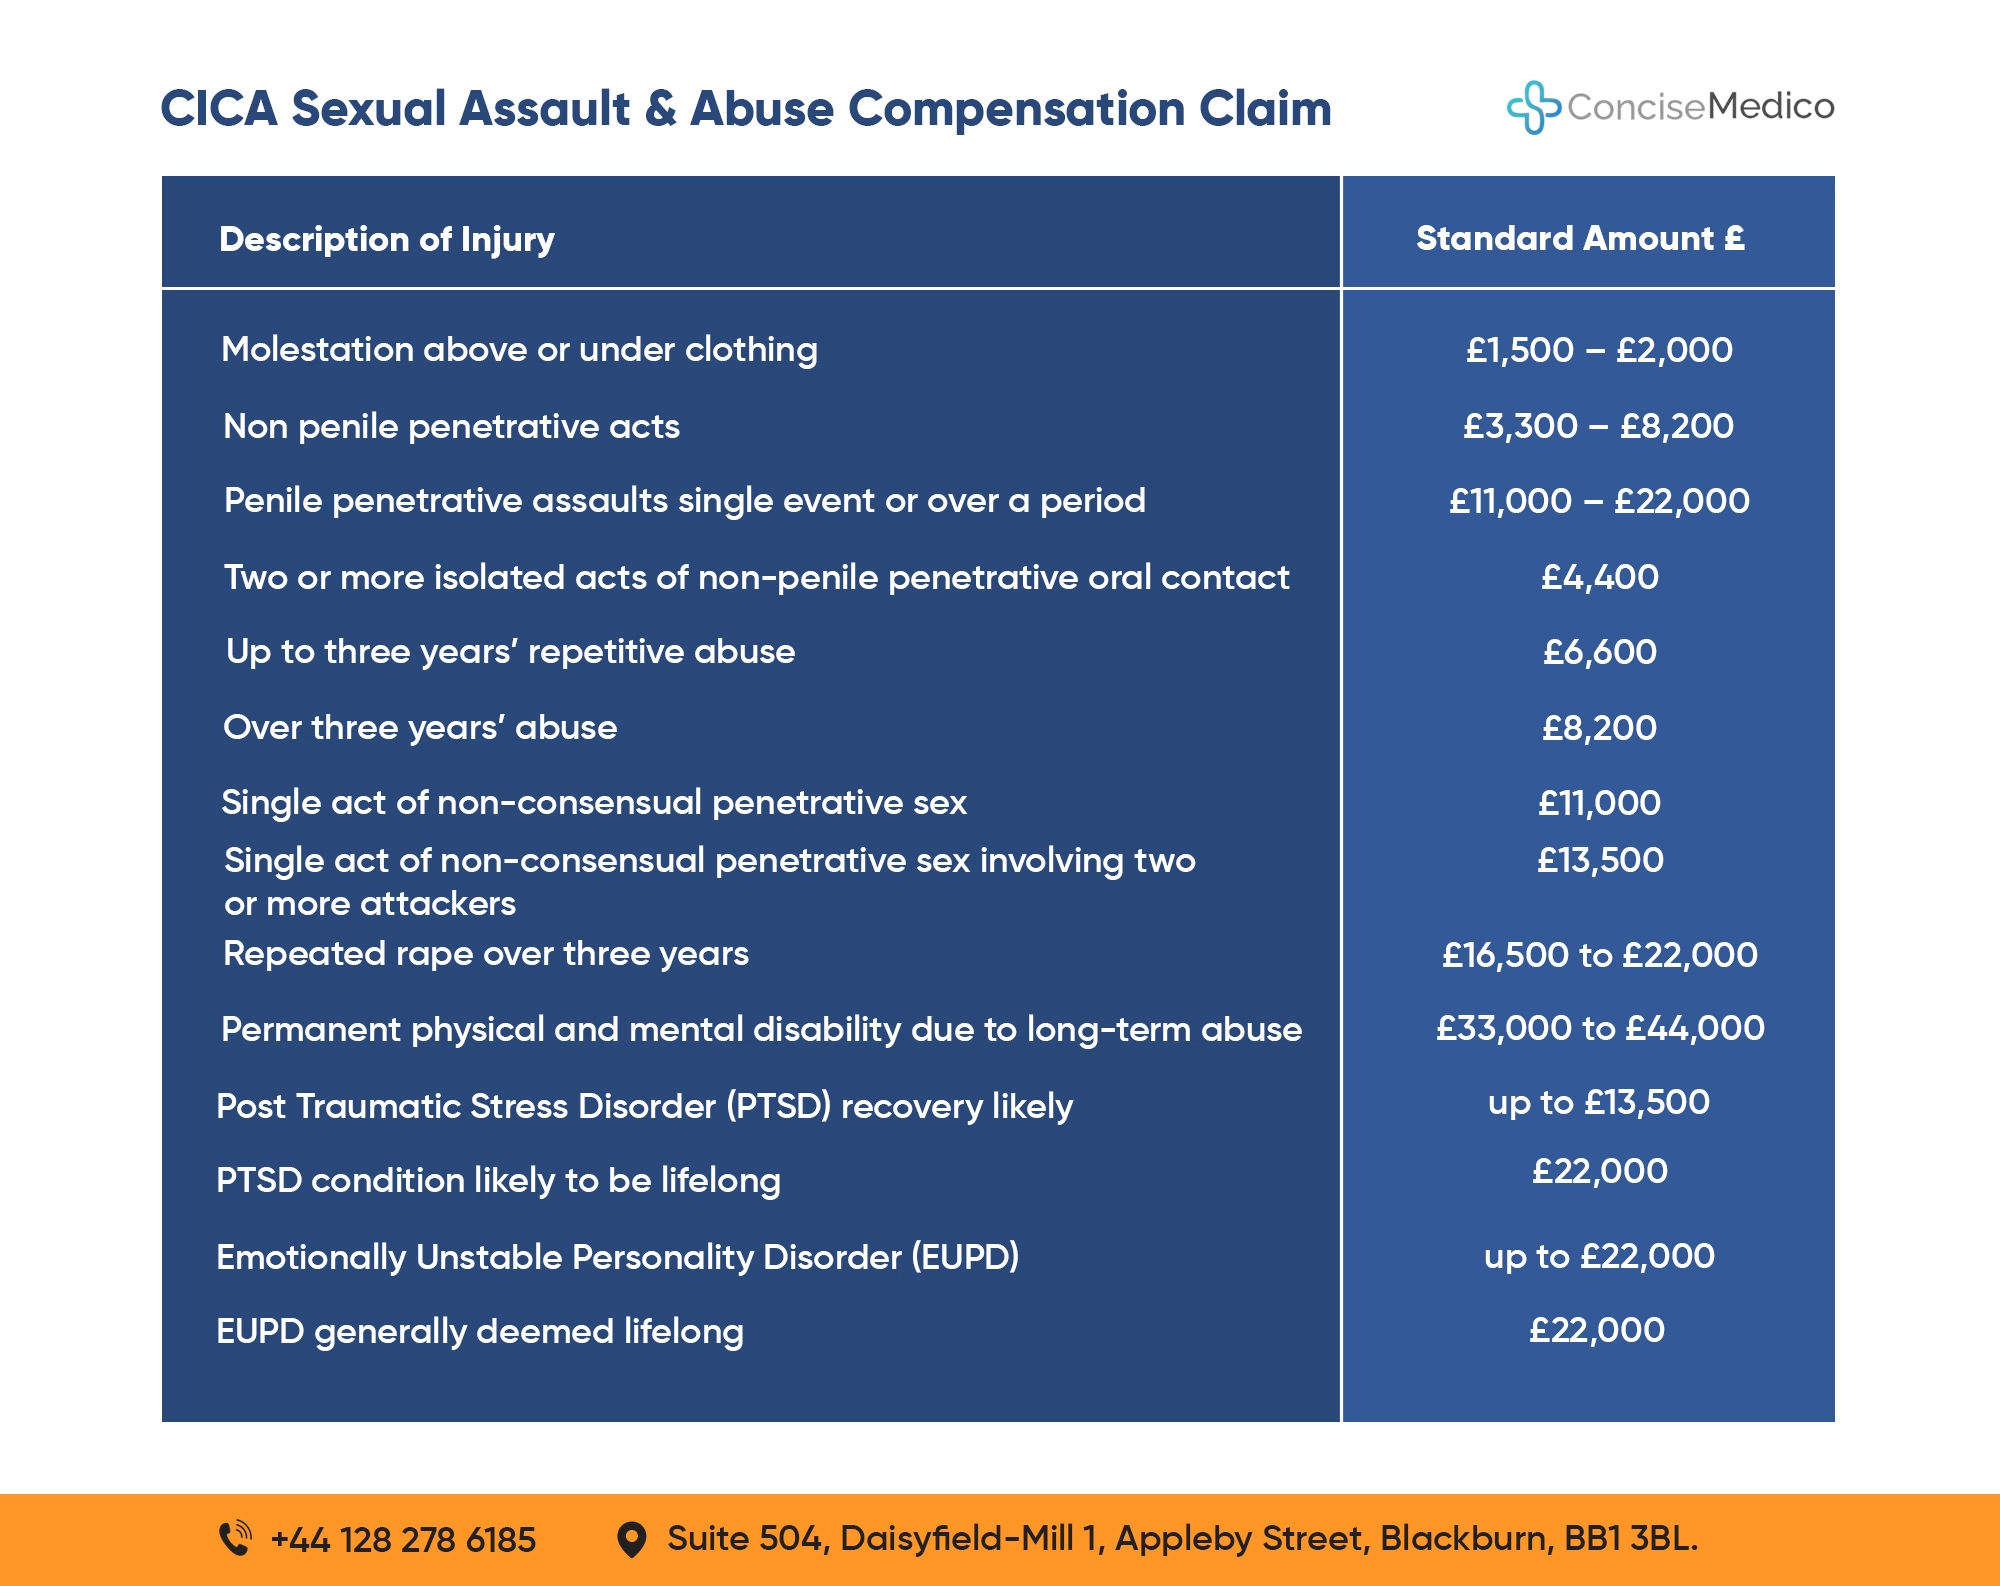 CICA Sexual Assault and Abuse Compensation Amount